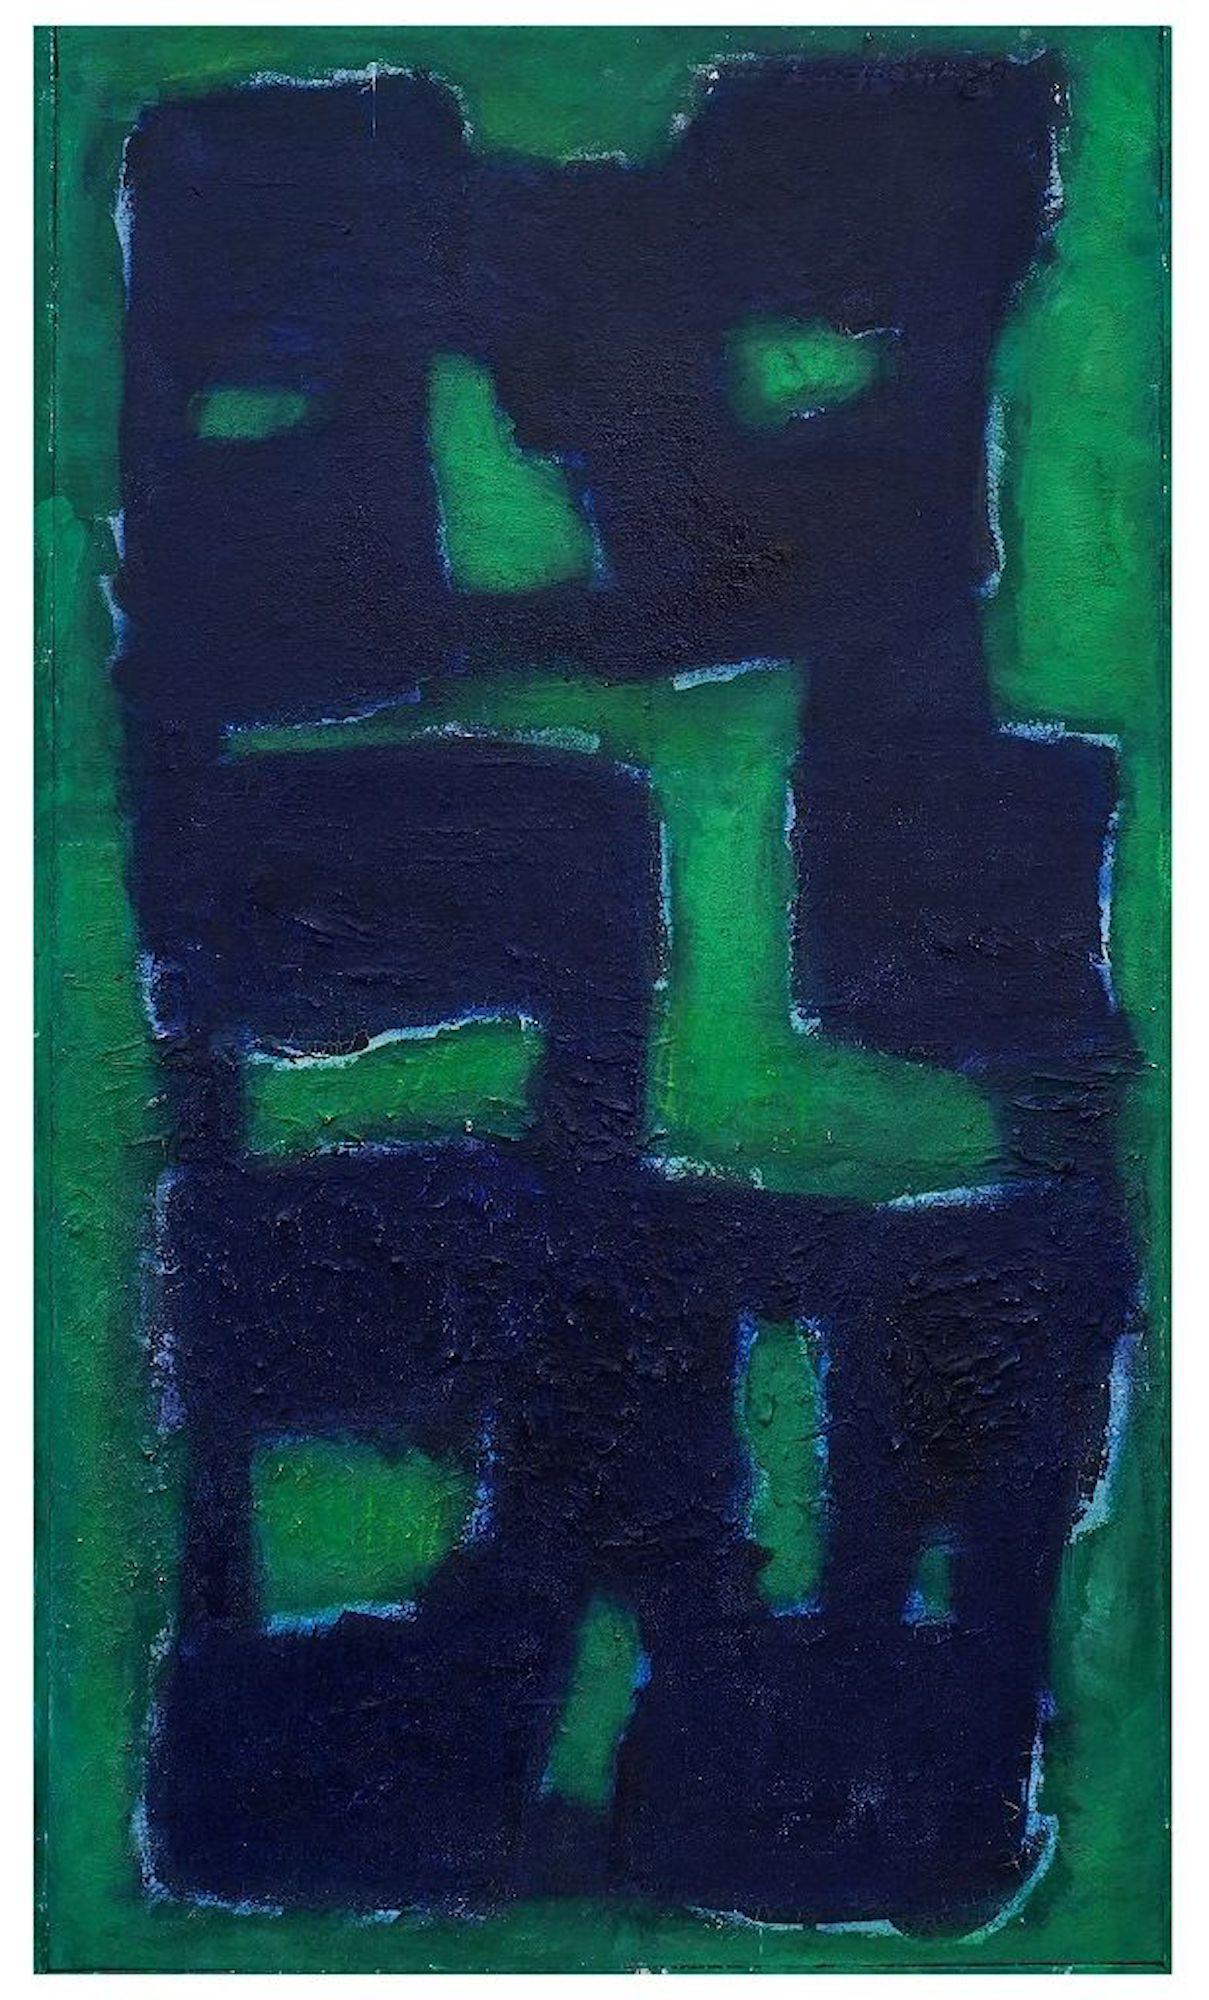 Abstract Expressionism is an original artwork realized by Giorgio Lo Fermo in 2005. Oil on canvas. Frame included. Perfect conditions.

The artwork shows an interesting abstract geometrical composition. The main colors are deep blue and emerald